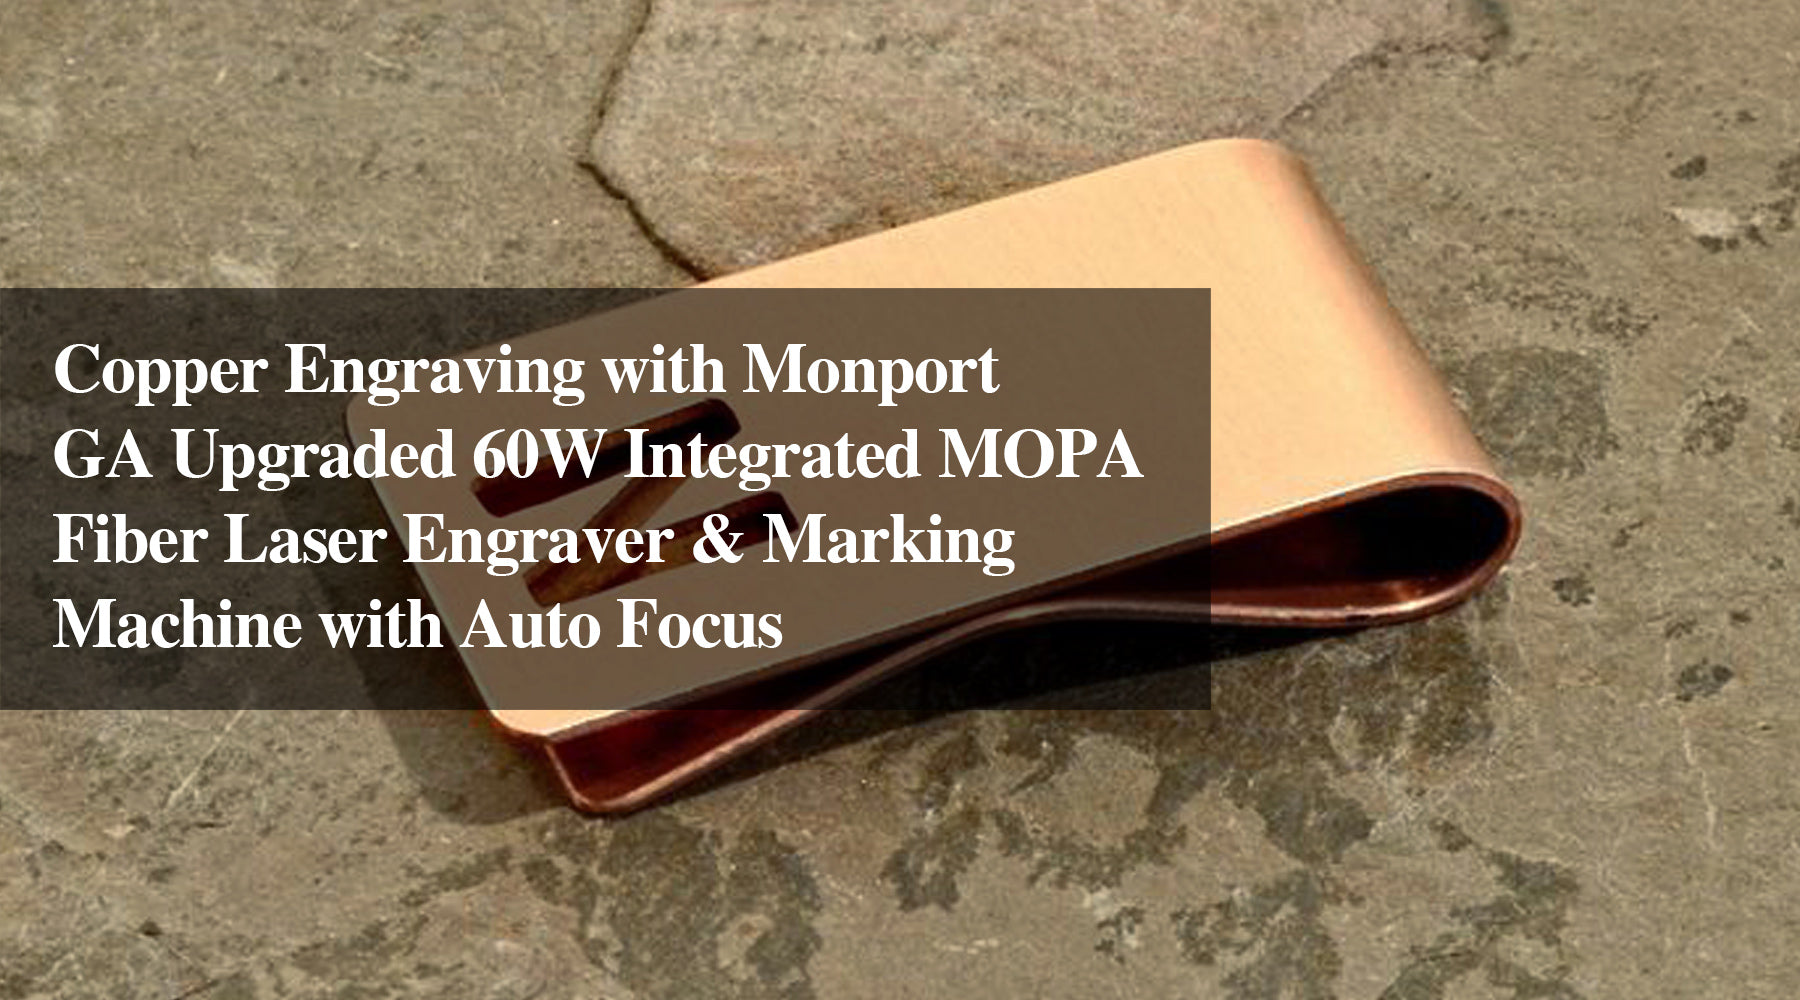 Copper Engraving with Monport GA Upgraded 60W Integrated MOPA Fiber Laser Engraver & Marking Machine with Auto Focus